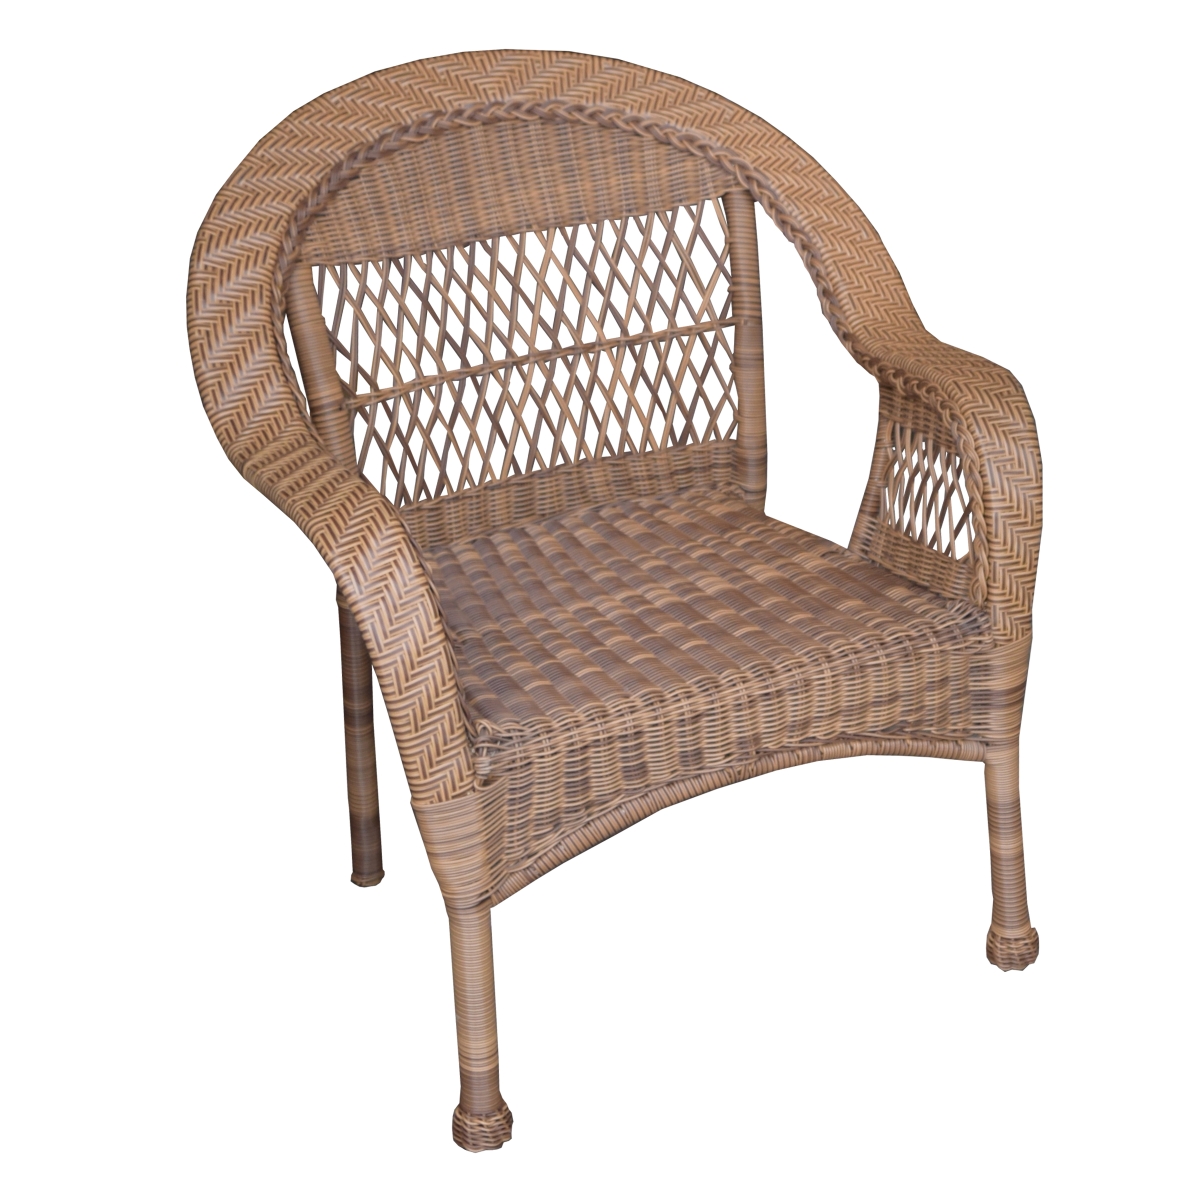 Oakland Living 9999-chair-nt Traditional Outdoor & Indoor Stackable All Weather Resin Light Brown Wicker Patio Chair With Aluminum Frame, Natural